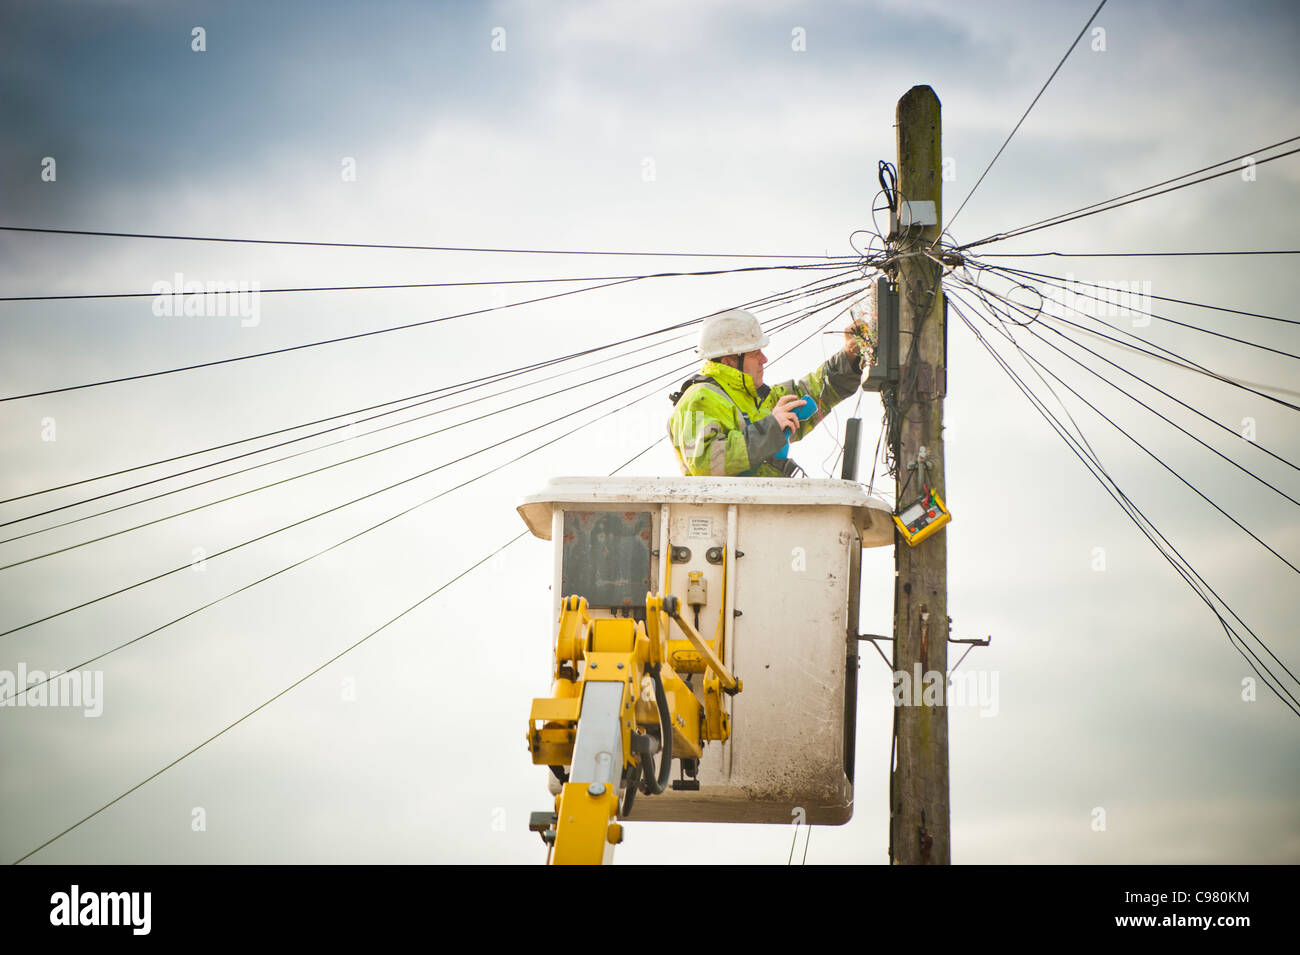 a BT British Telecom engineer repairing a telephone line from an elevated platform, UK Stock Photo